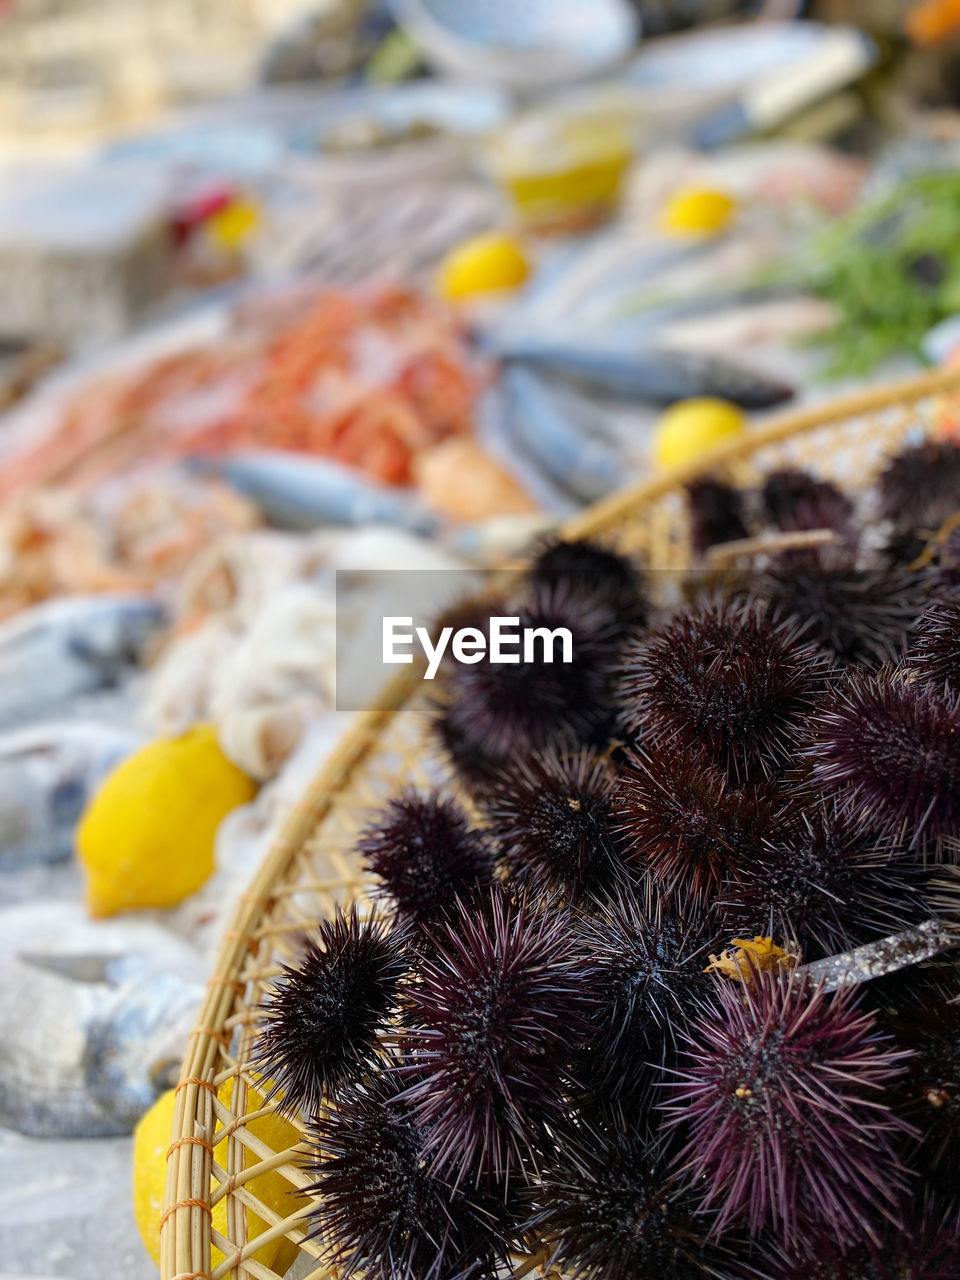 animal, food, food and drink, no people, market, echinoderm, animal themes, reef, animal wildlife, nature, healthy eating, outdoors, flower, freshness, fruit, day, focus on foreground, close-up, marine invertebrates, produce, retail